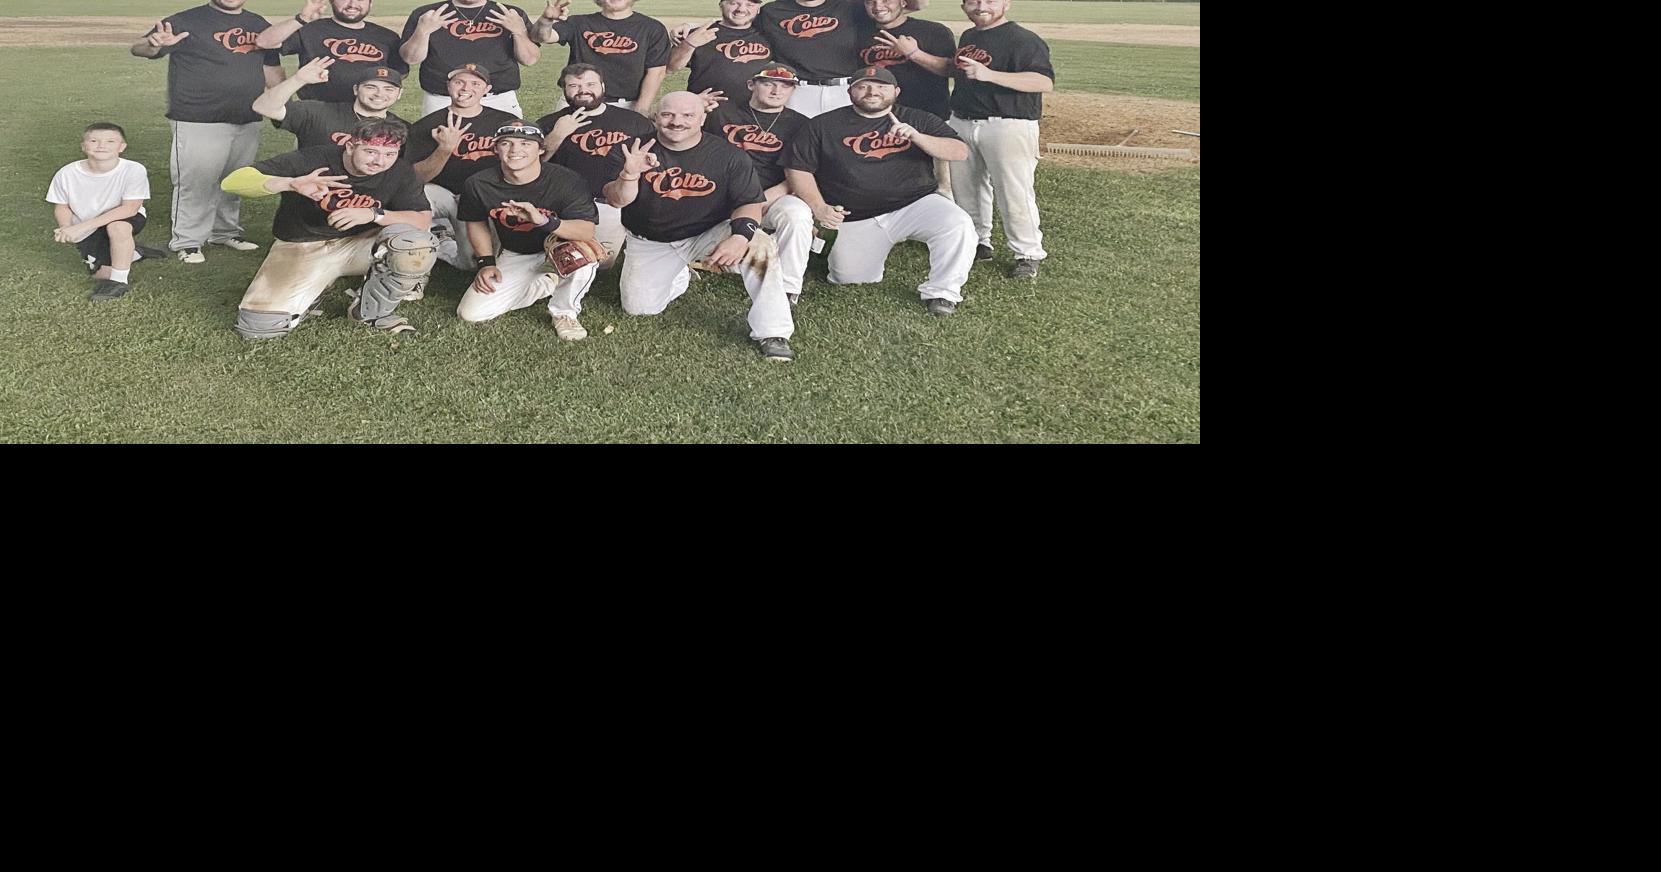 Blairsville captures third straight ICL title, Sports